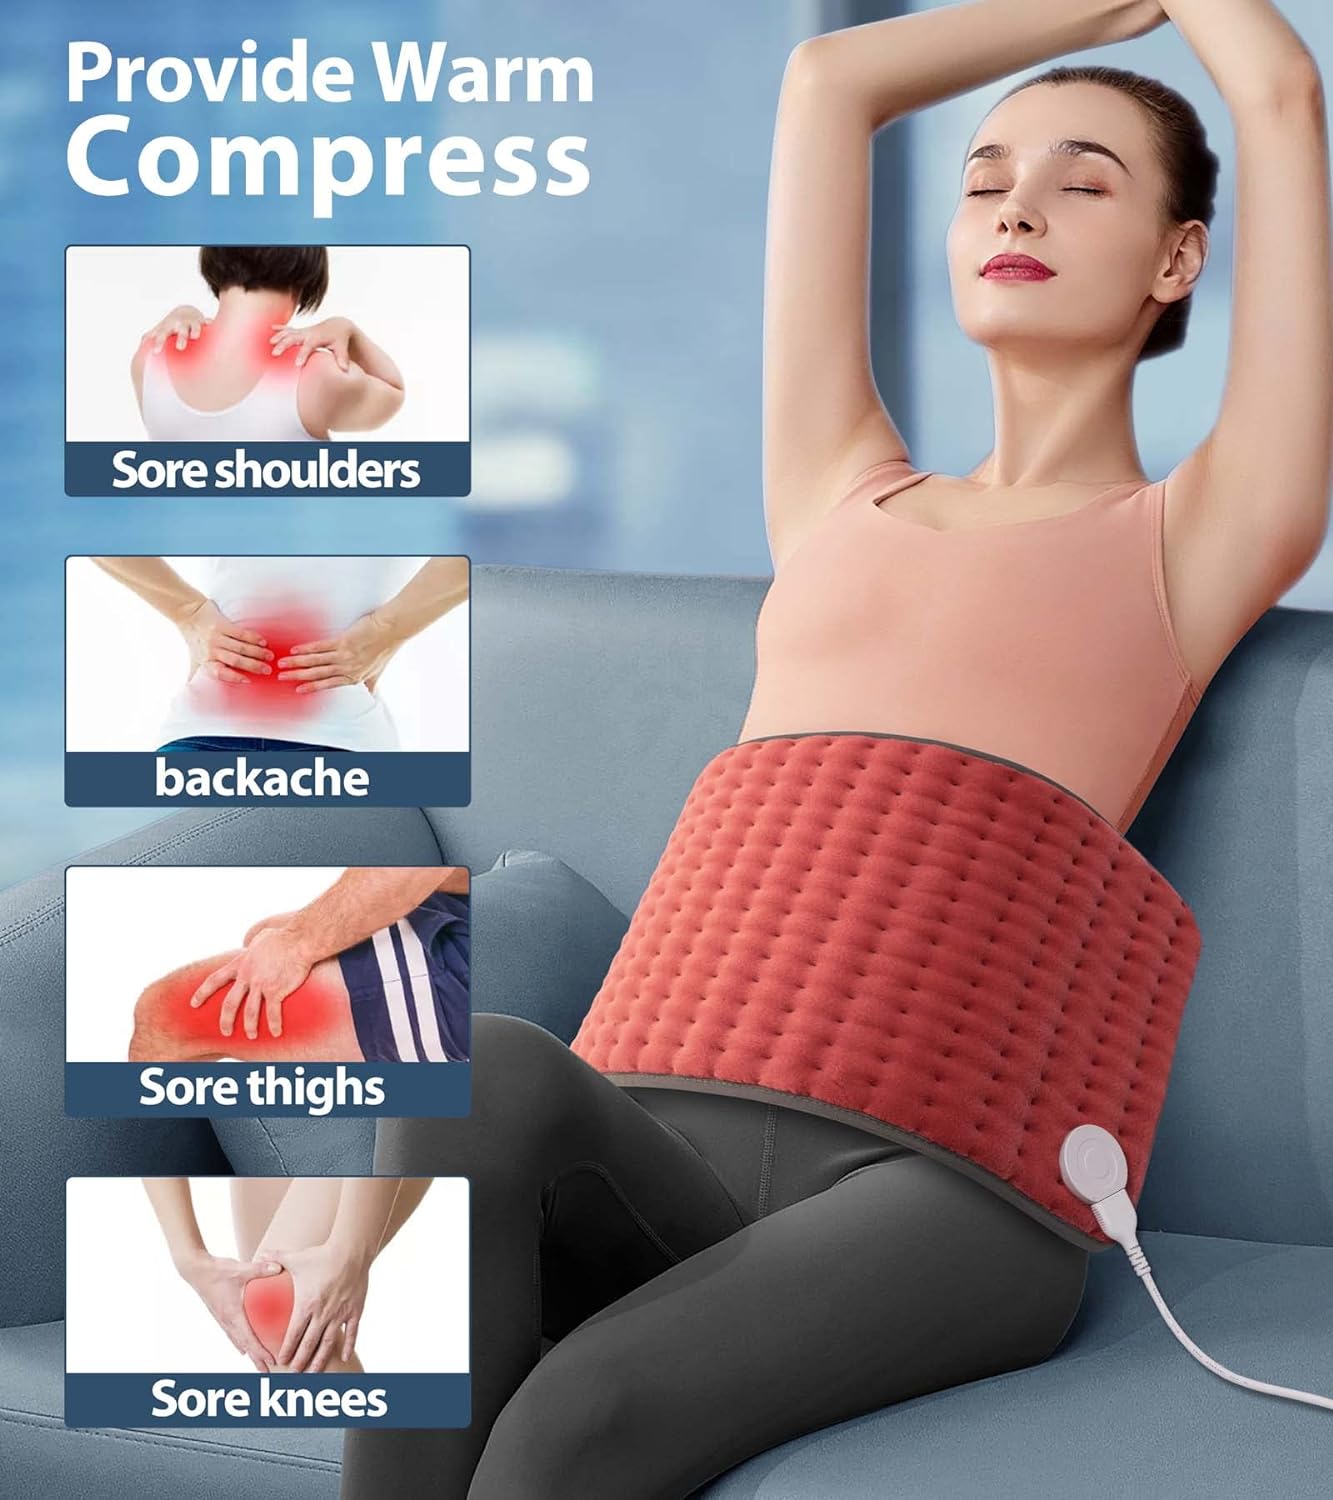 Heating Pad Review: Comparing 5 Top Options for Pain Relief